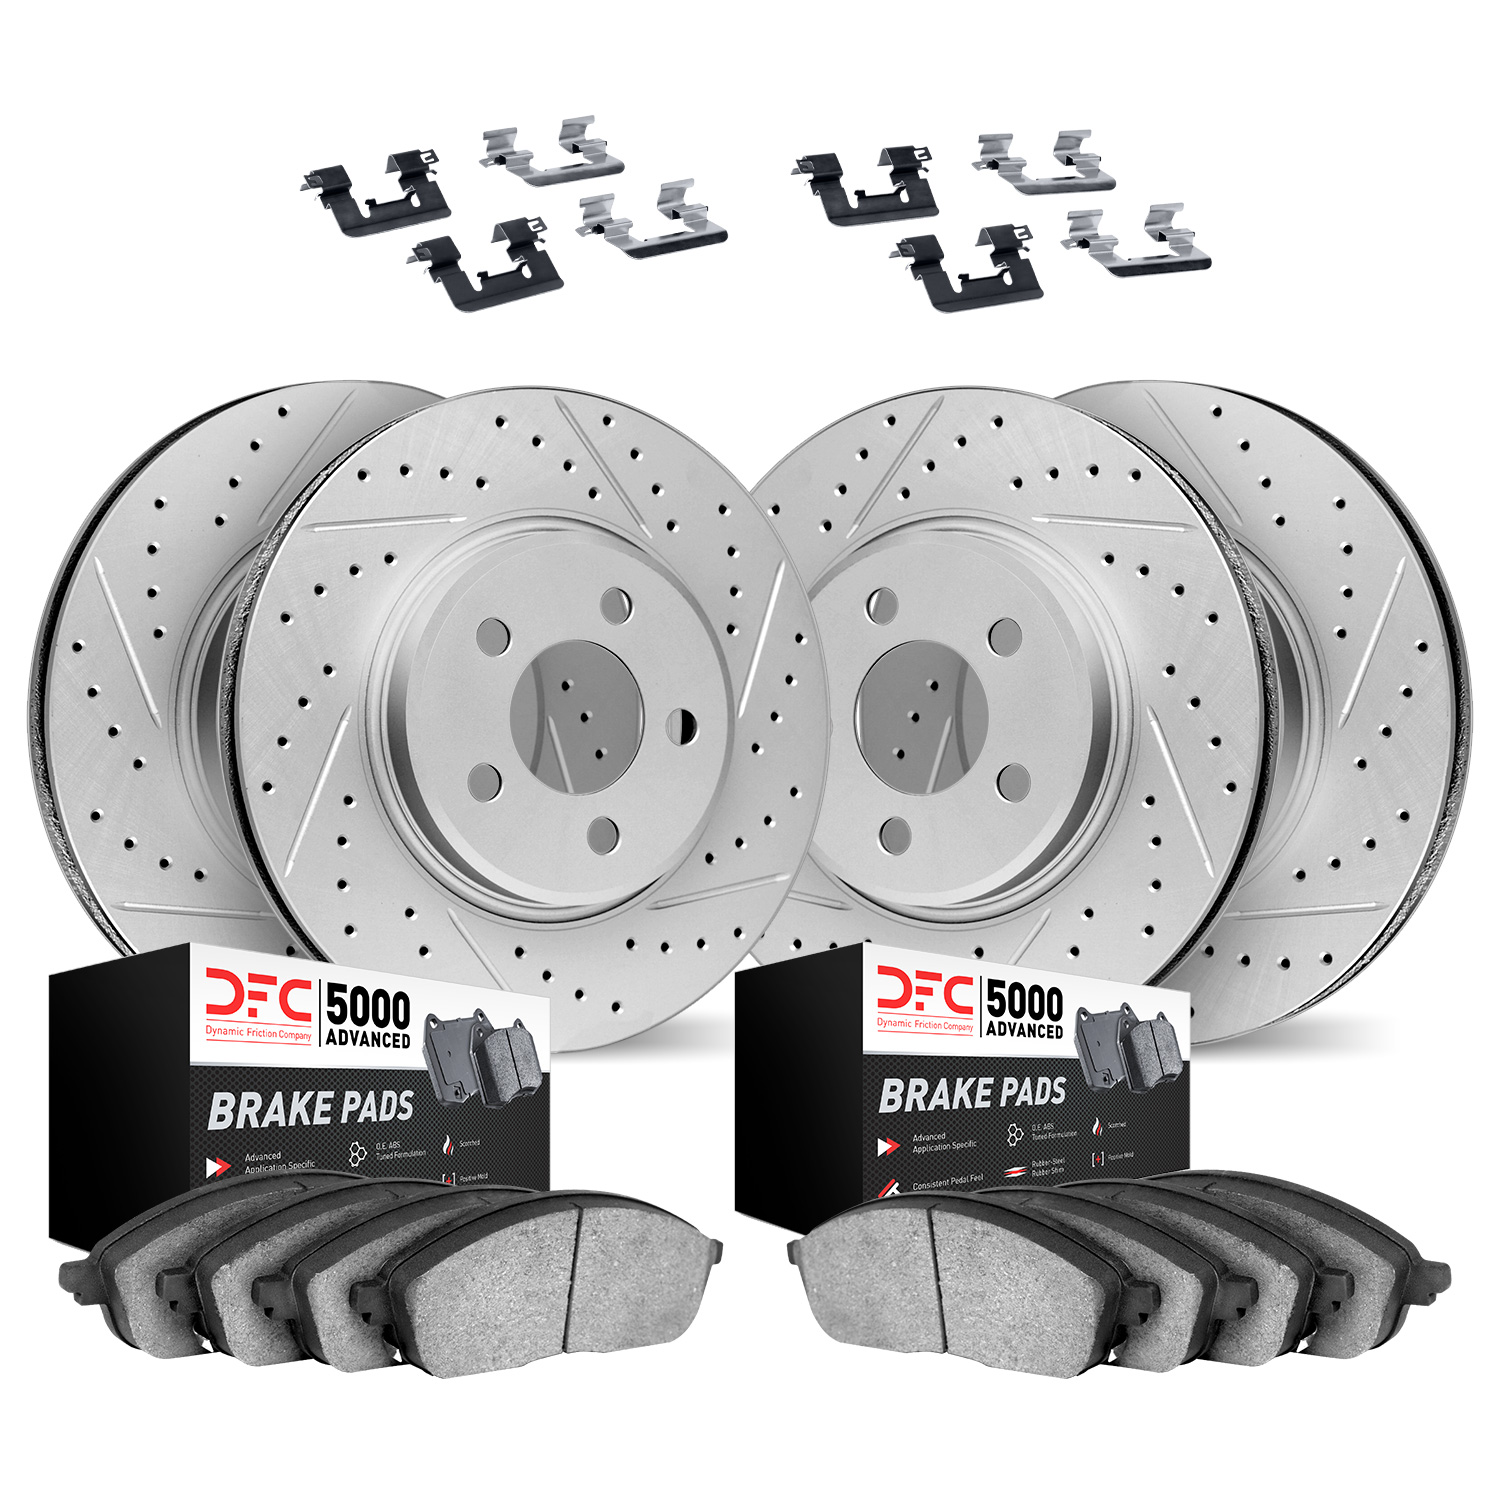 2514-31008 Geoperformance Drilled/Slotted Rotors w/5000 Advanced Brake Pads Kit & Hardware, 2008-2010 BMW, Position: Front and R